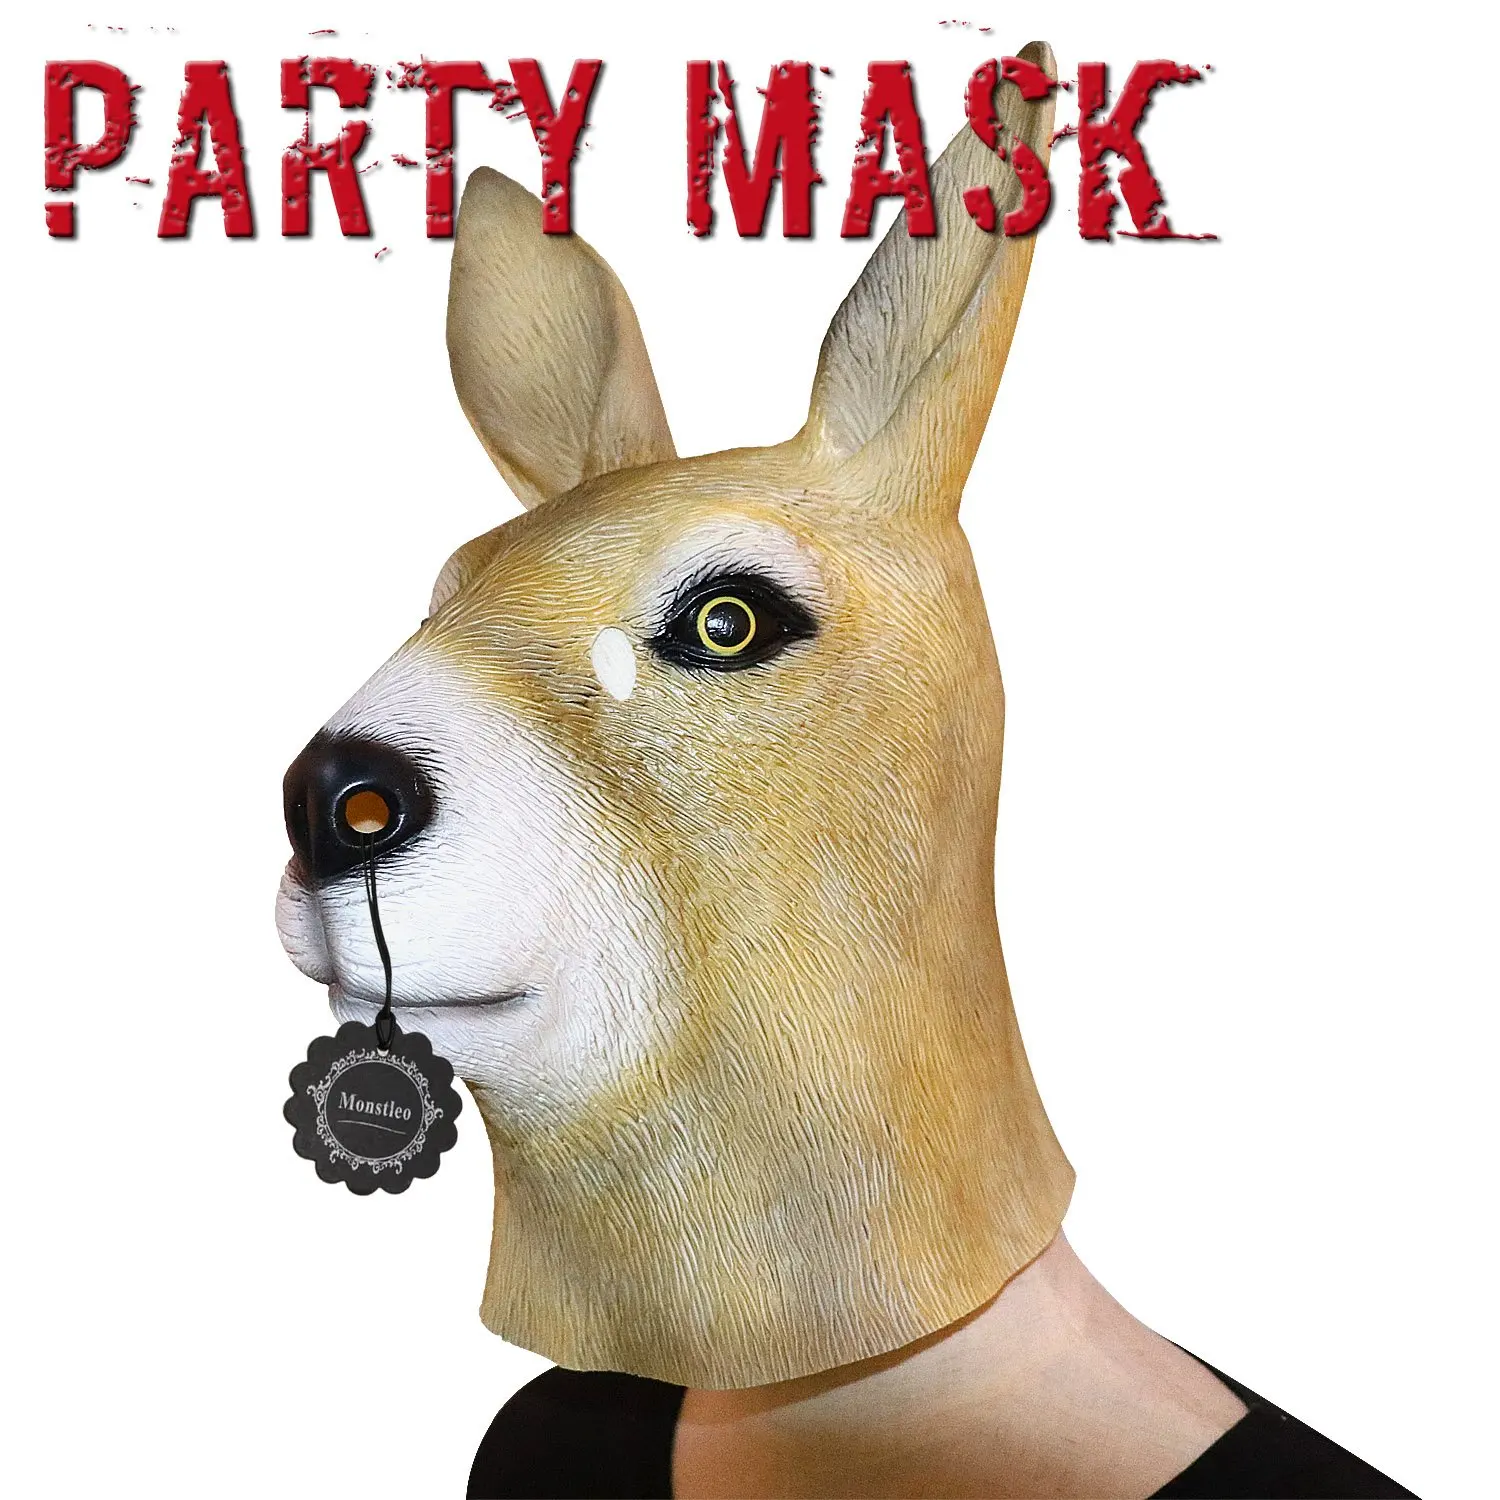 QTMY Latex Rubber Animal Mask Halloween Party Costume 